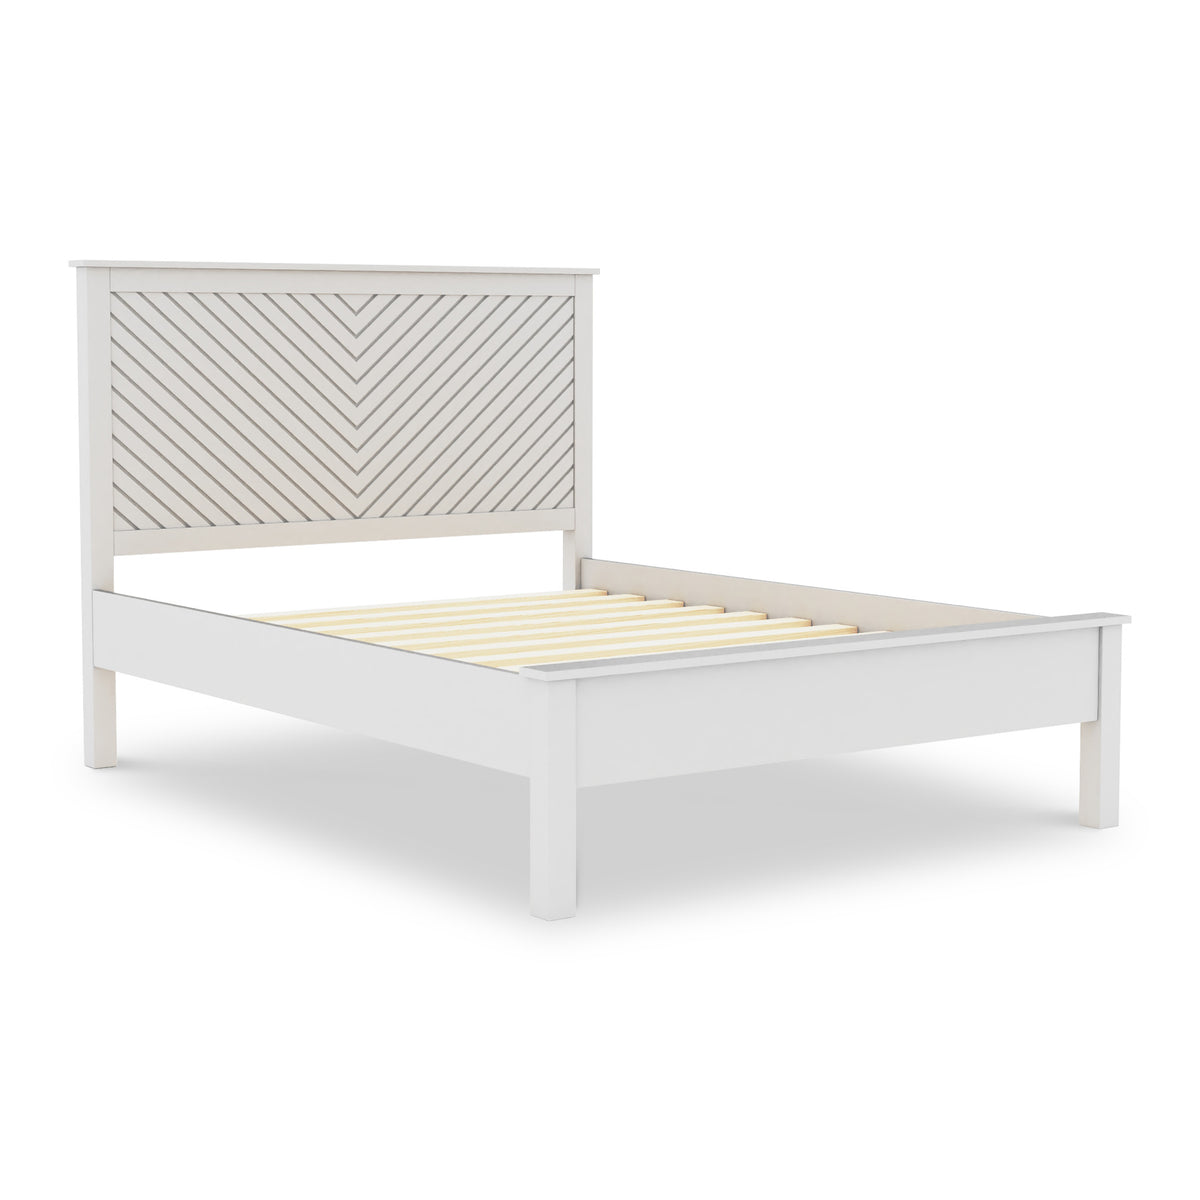 Wotton Chevron Bed Frame from Roseland Furniture